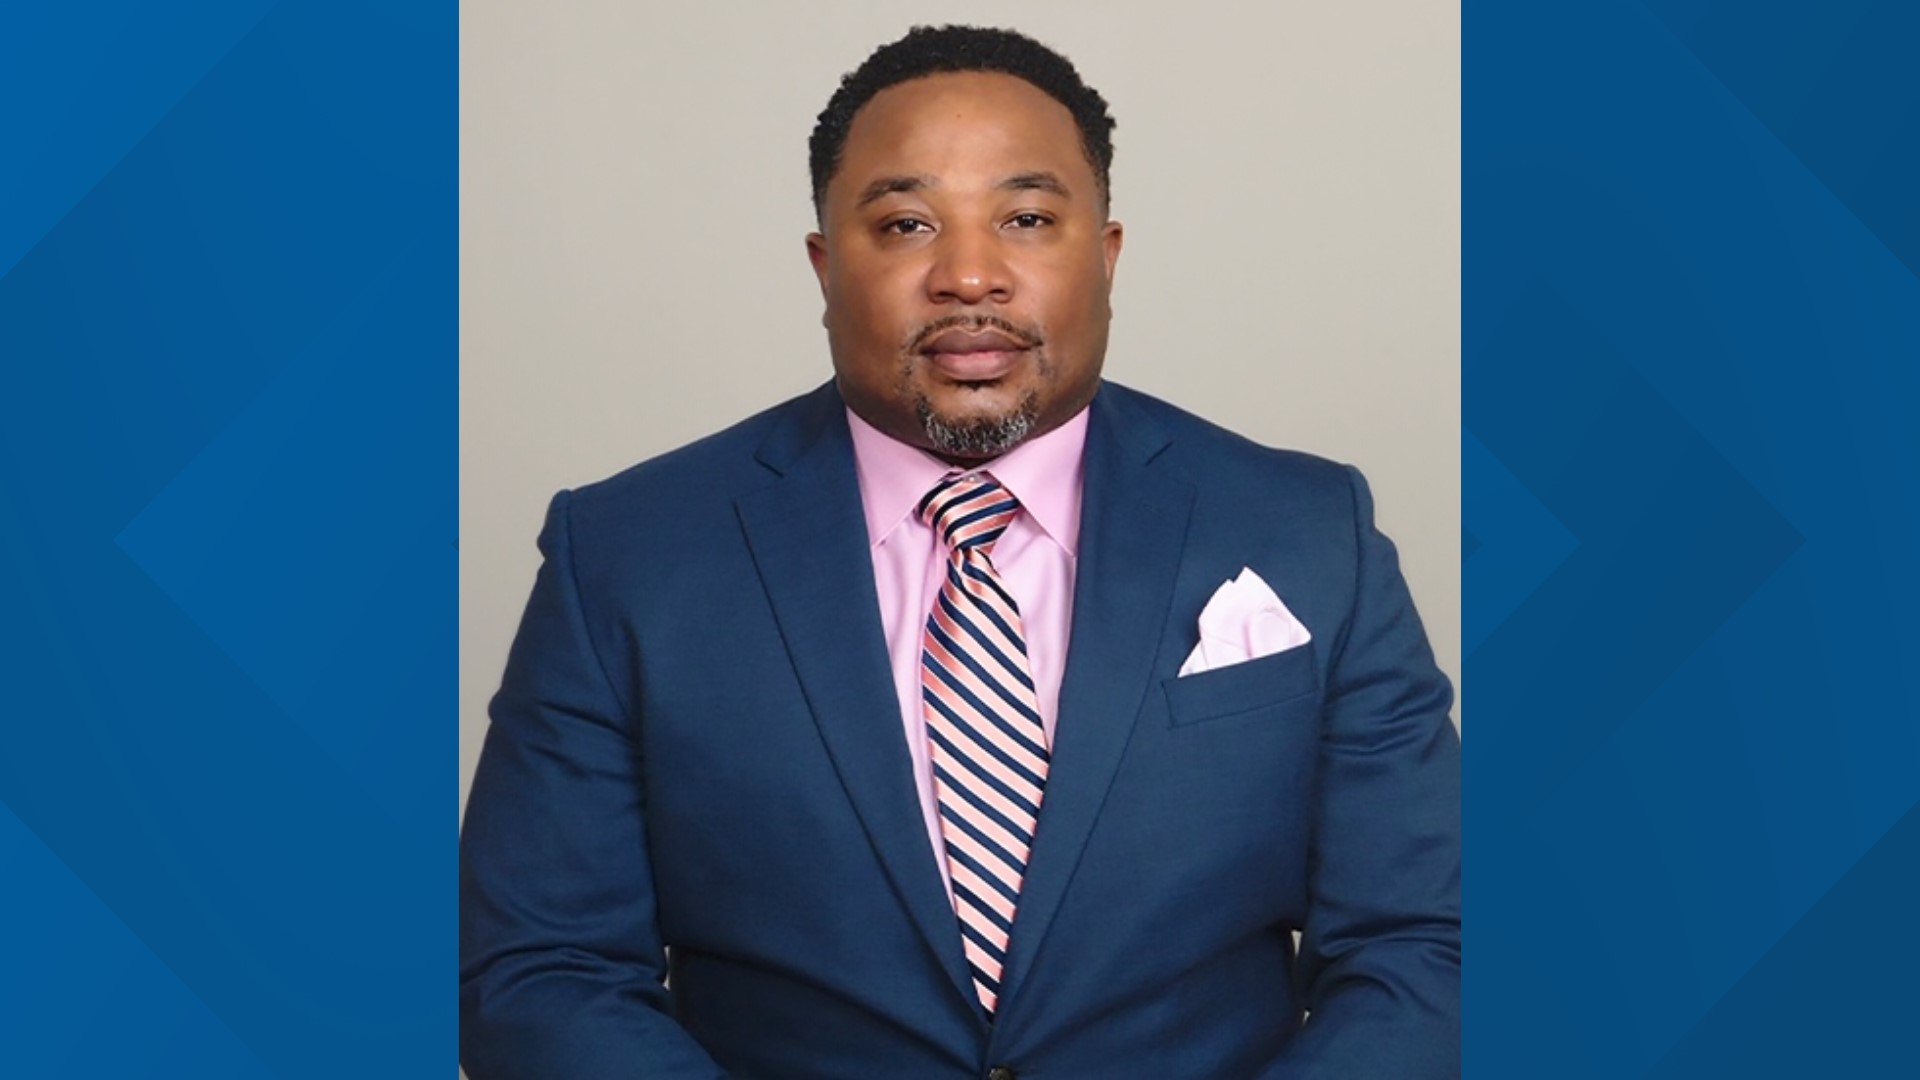 Dr. Devon Horton was chosen to become the new superintendent after he became the top candidate following a “fair and robust selection process,” a release stated.